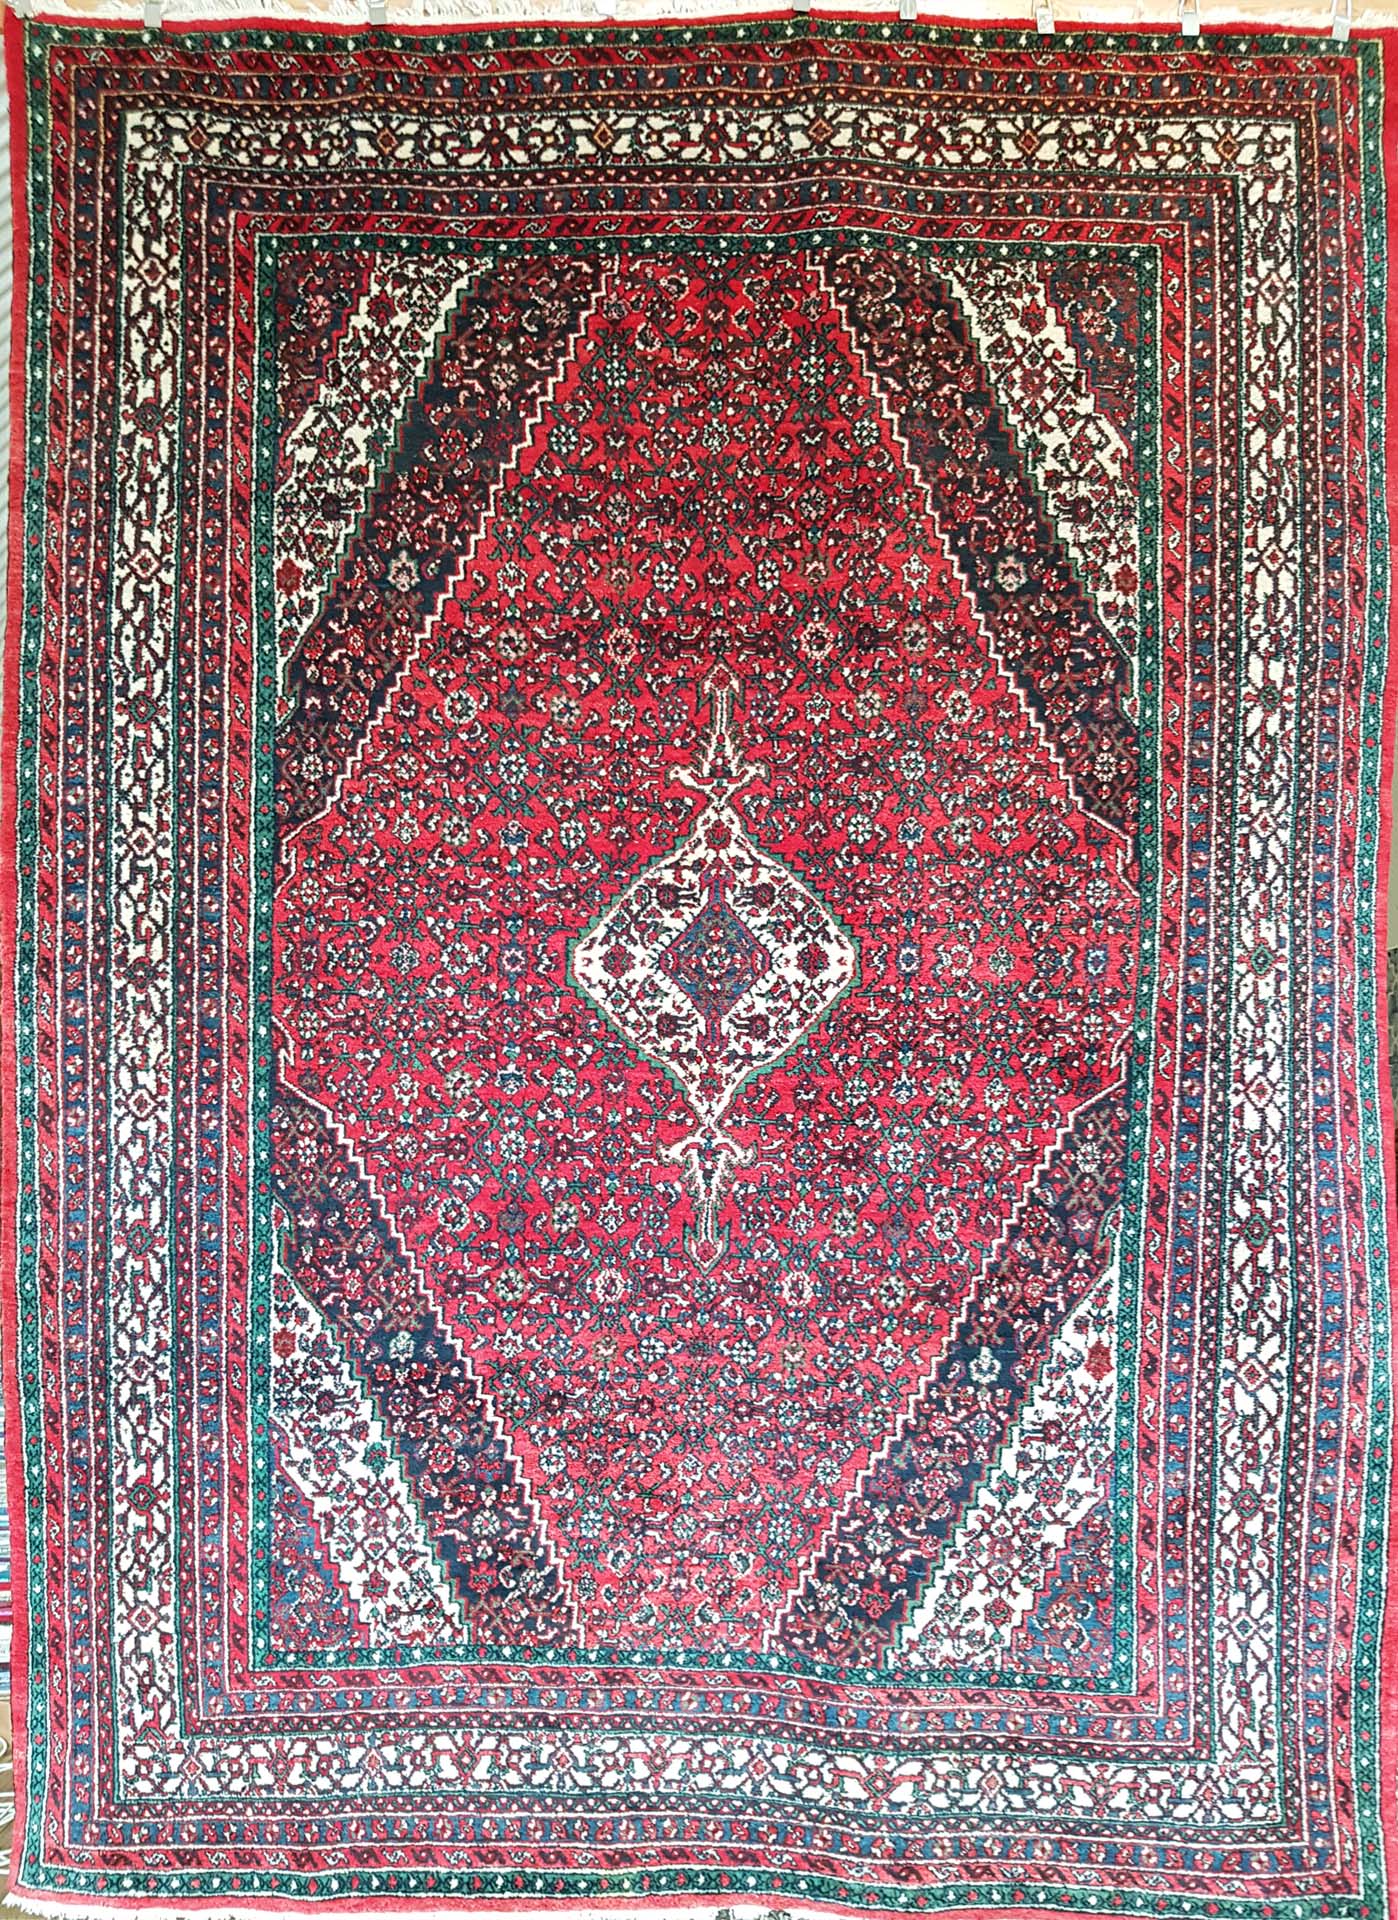 Hussainabad rug with central medallion